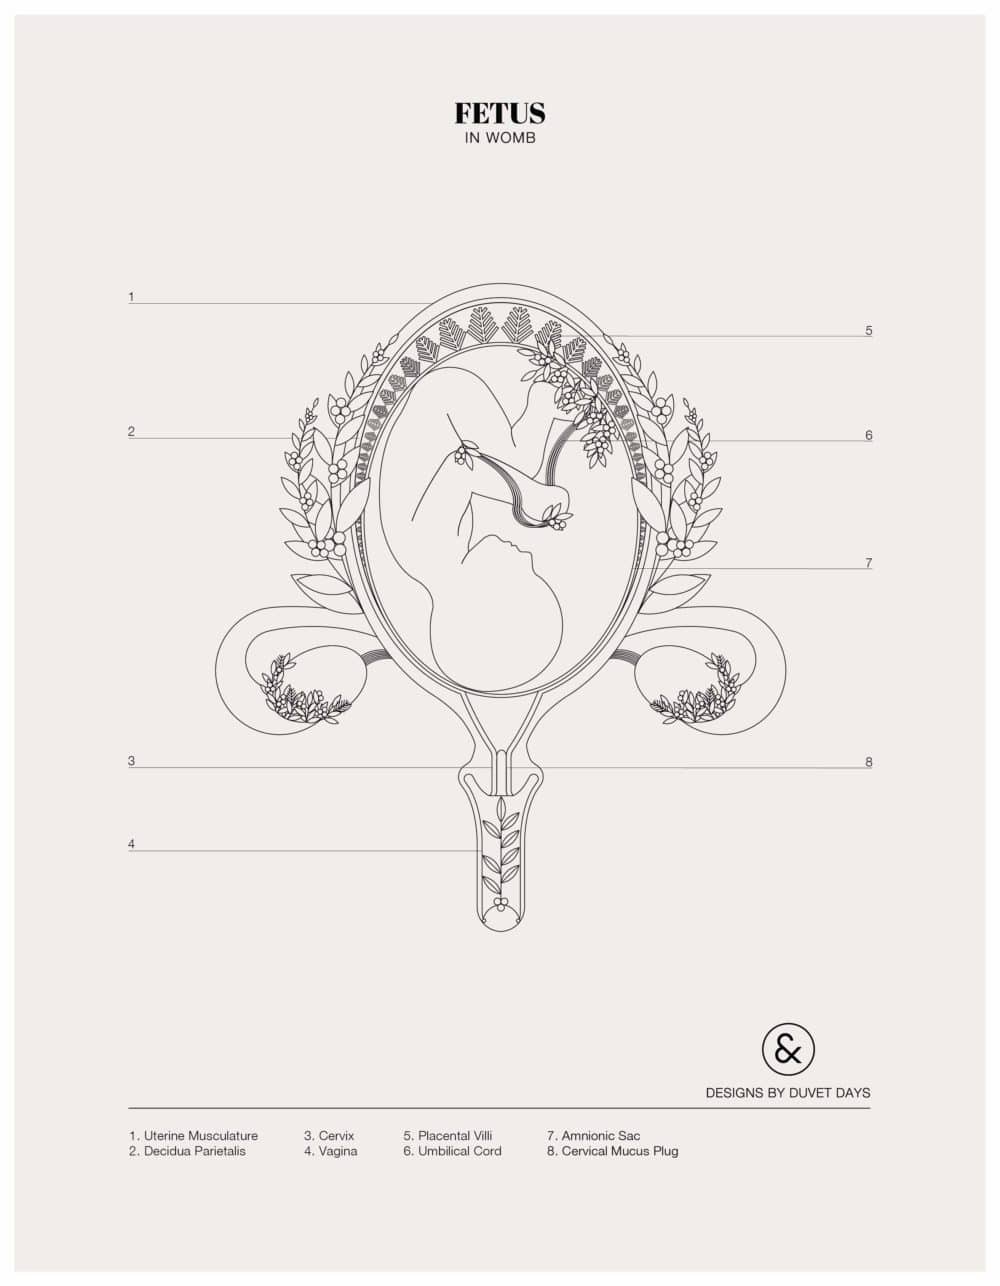 Designs By Duvet Days_8.5x11_Fetus in Womb_Colouring Sheet_Preview